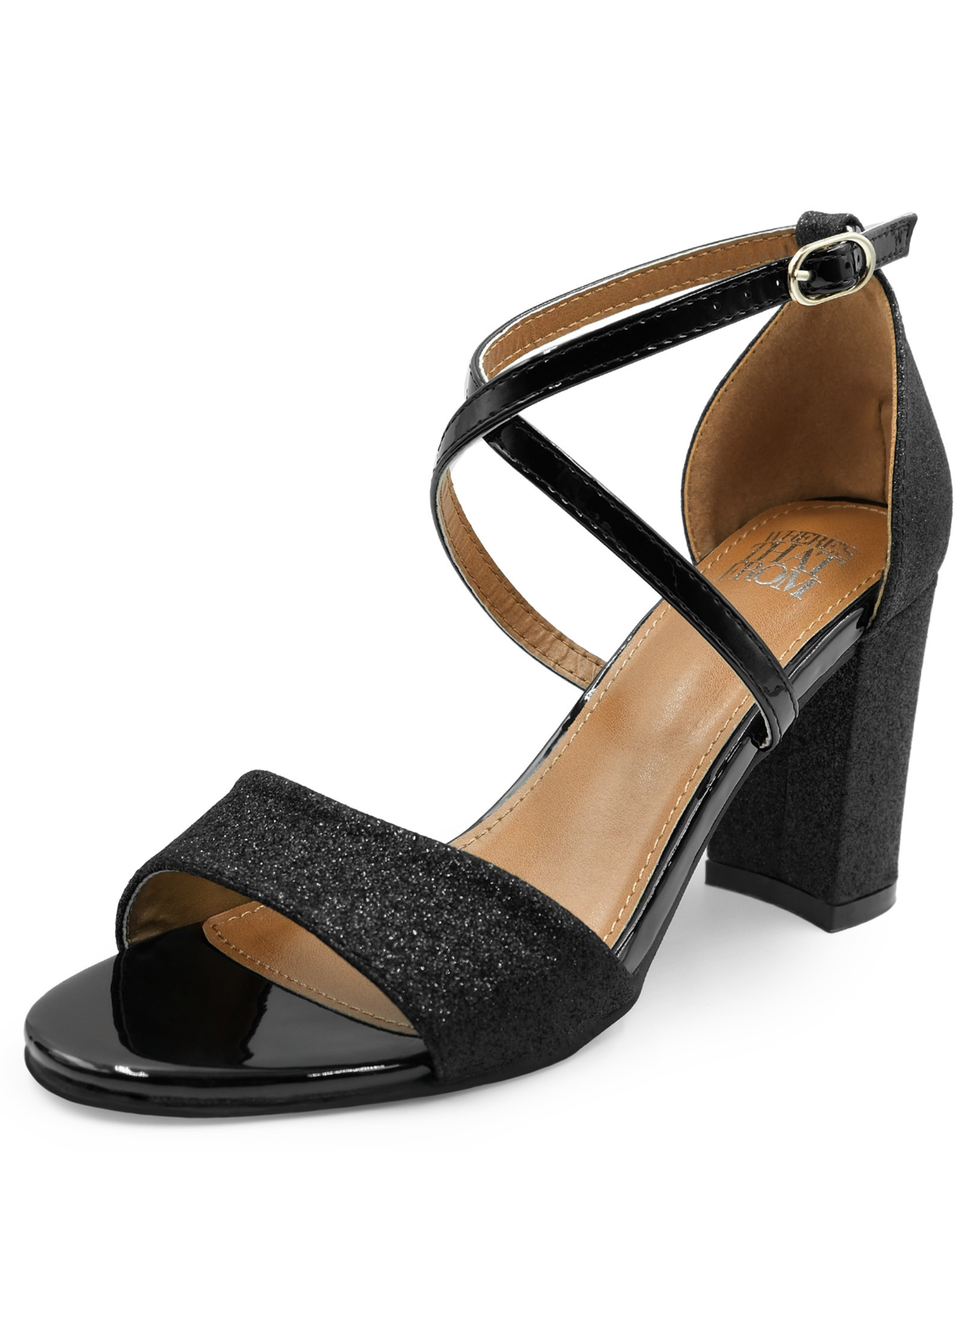 Where's That From Black Ruth Mid High Block Heel Sandals